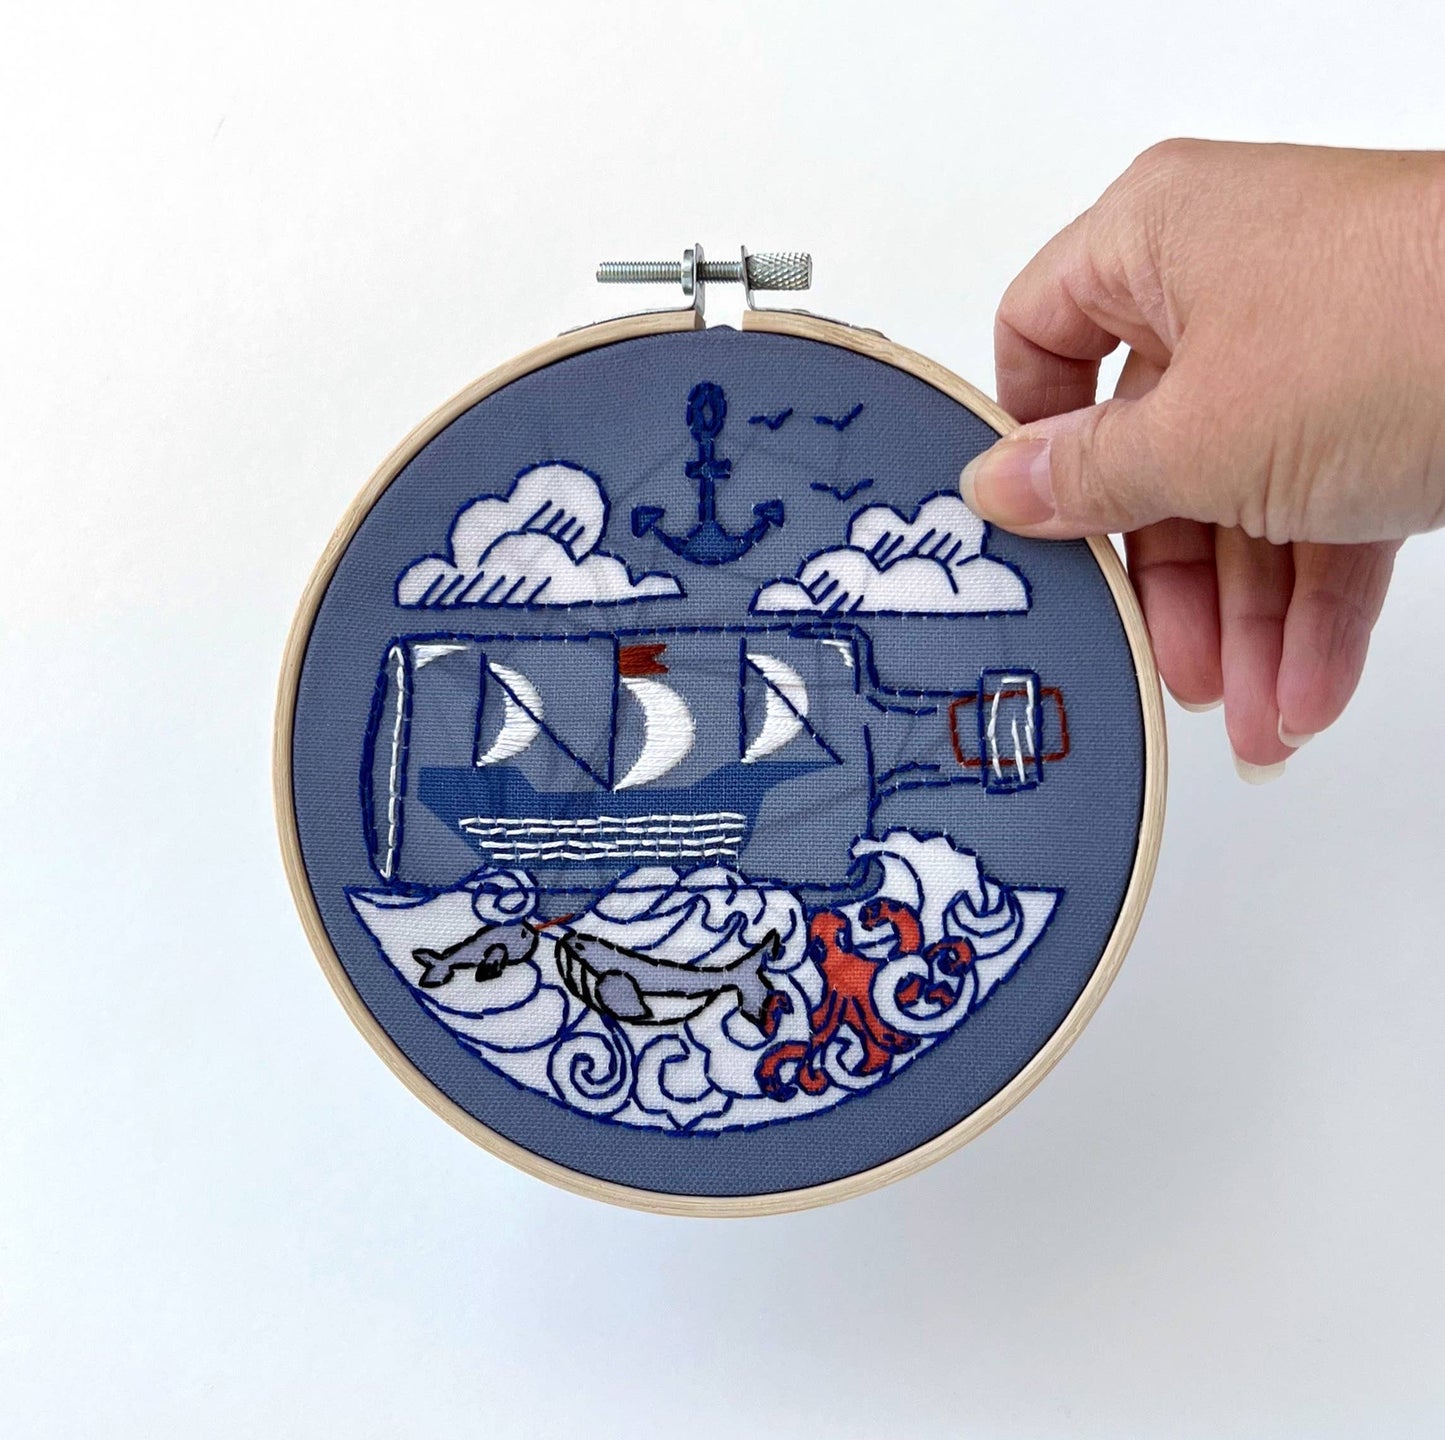 Themed Embroidery Kits